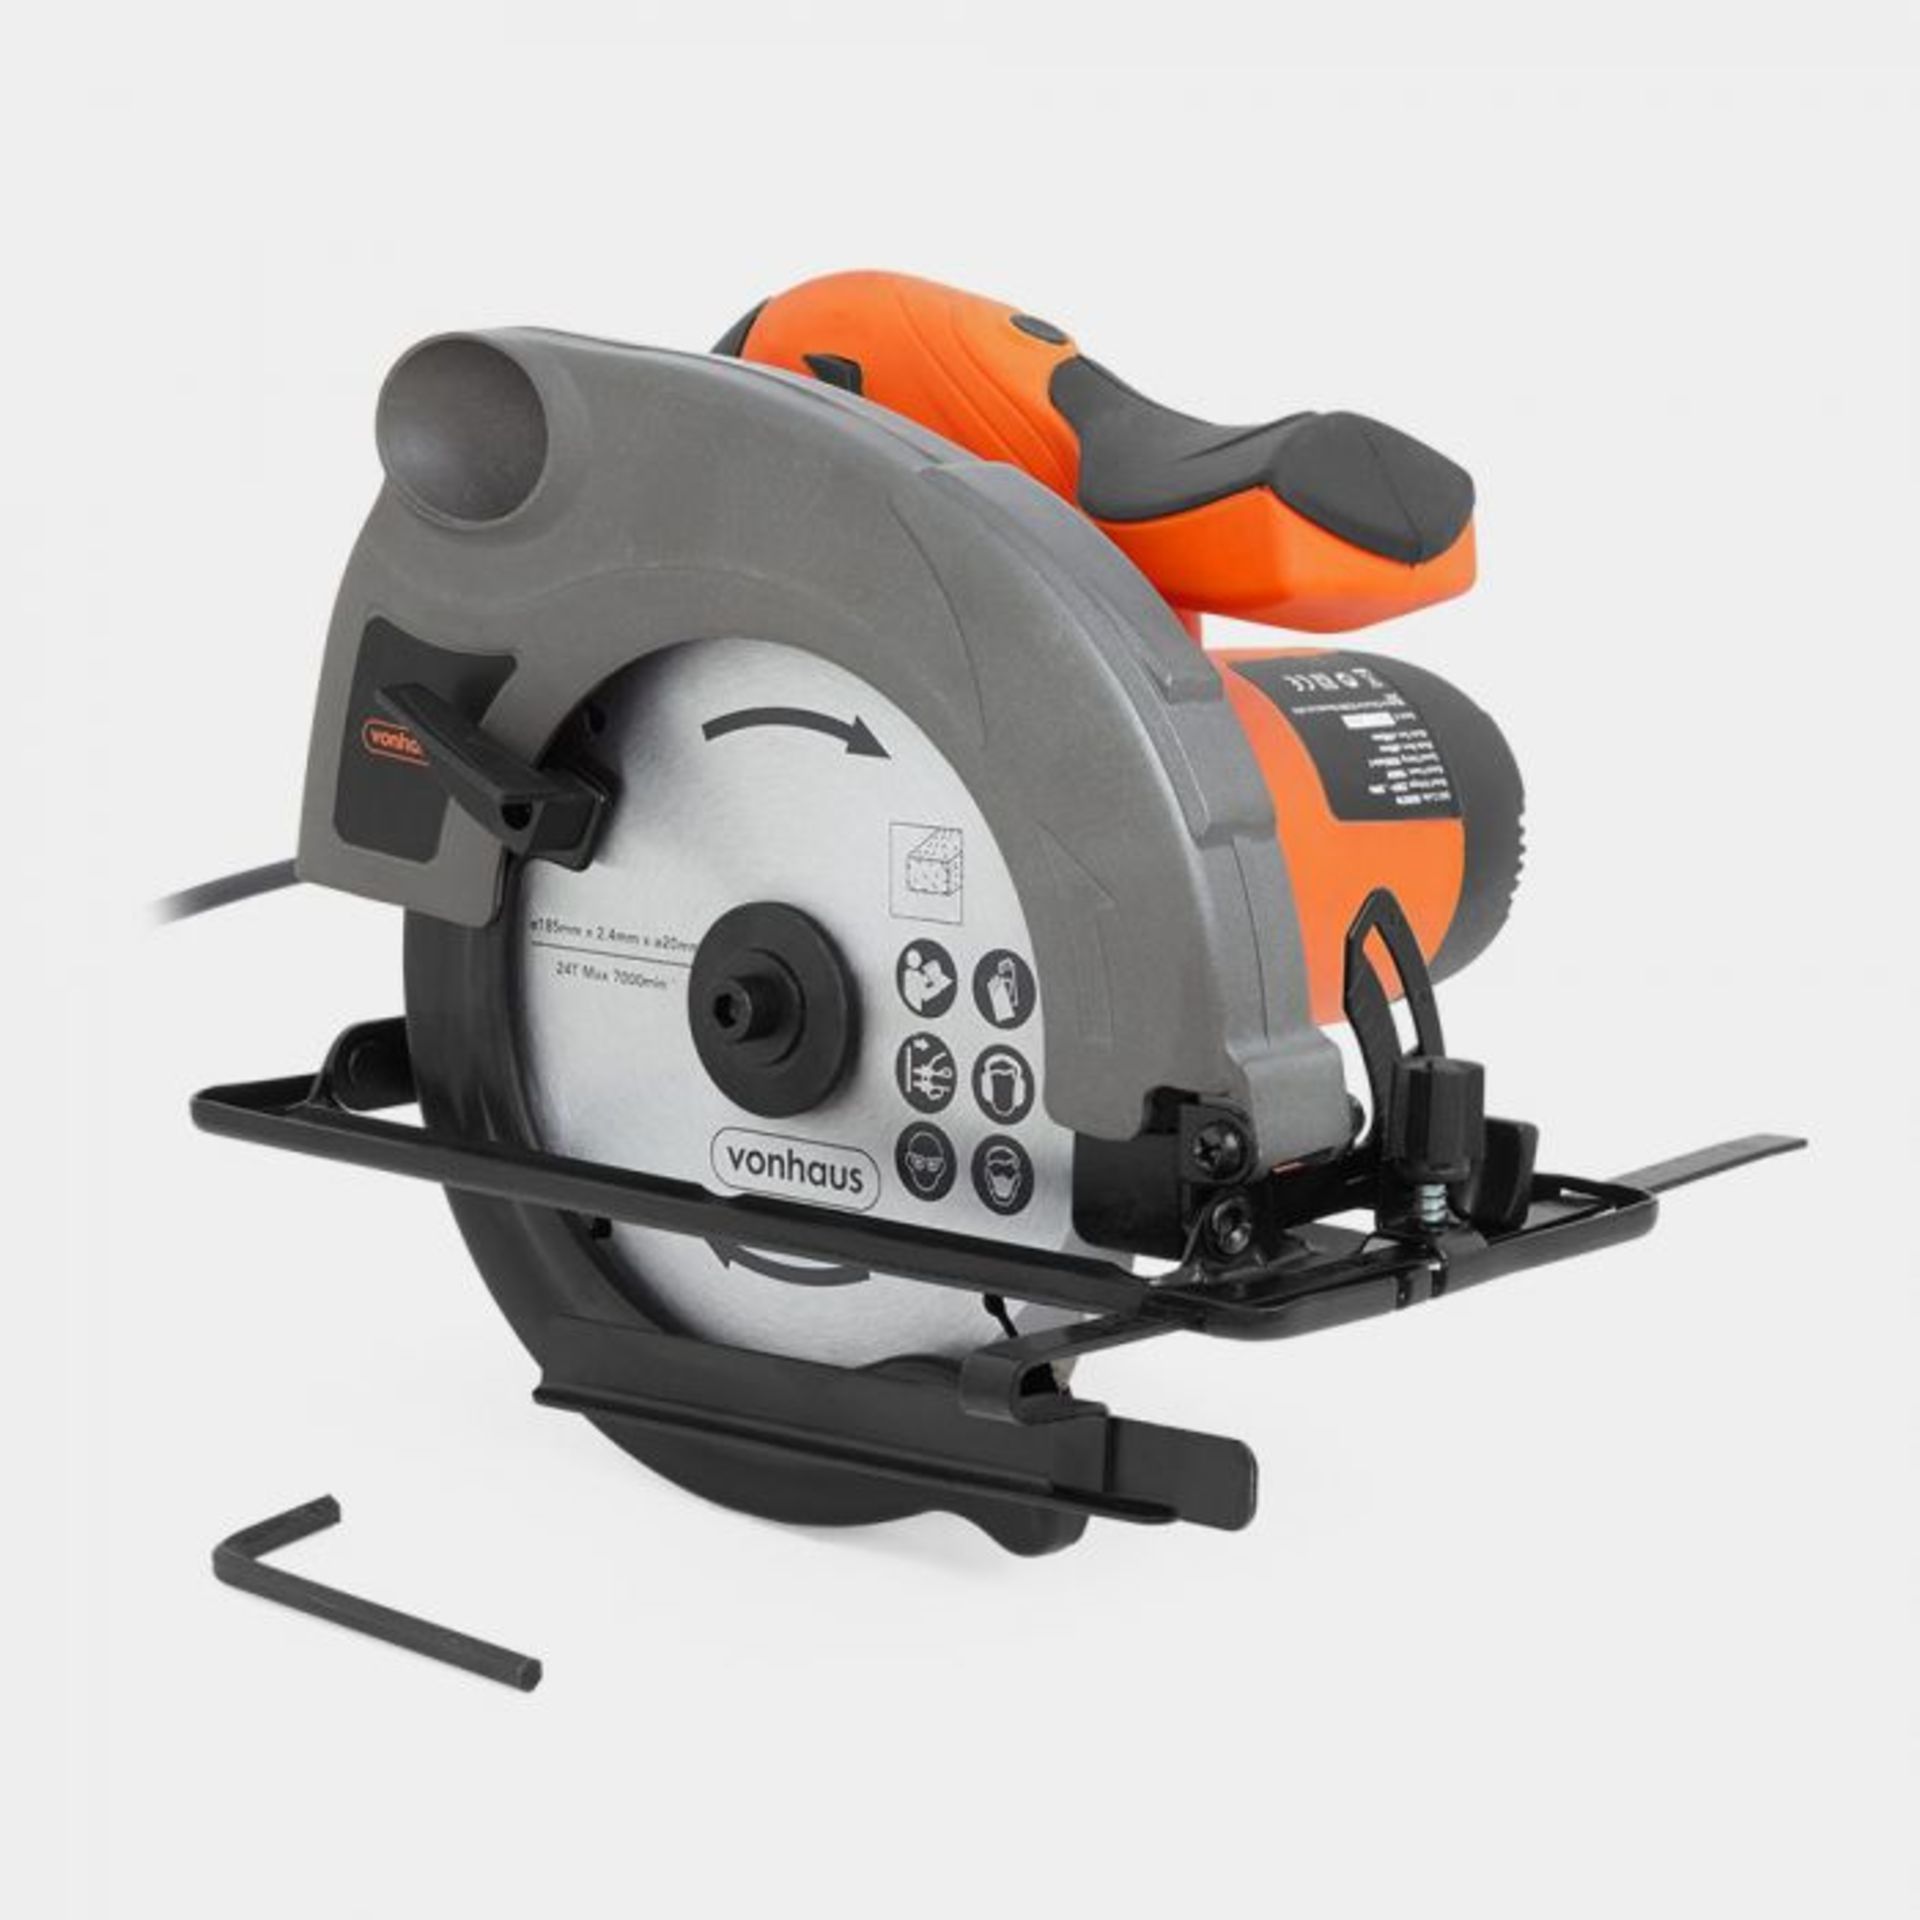 1500W Multi-Purpose Circular Saw. Our Multipurpose 1500W Circular Saw is perfect for those looking